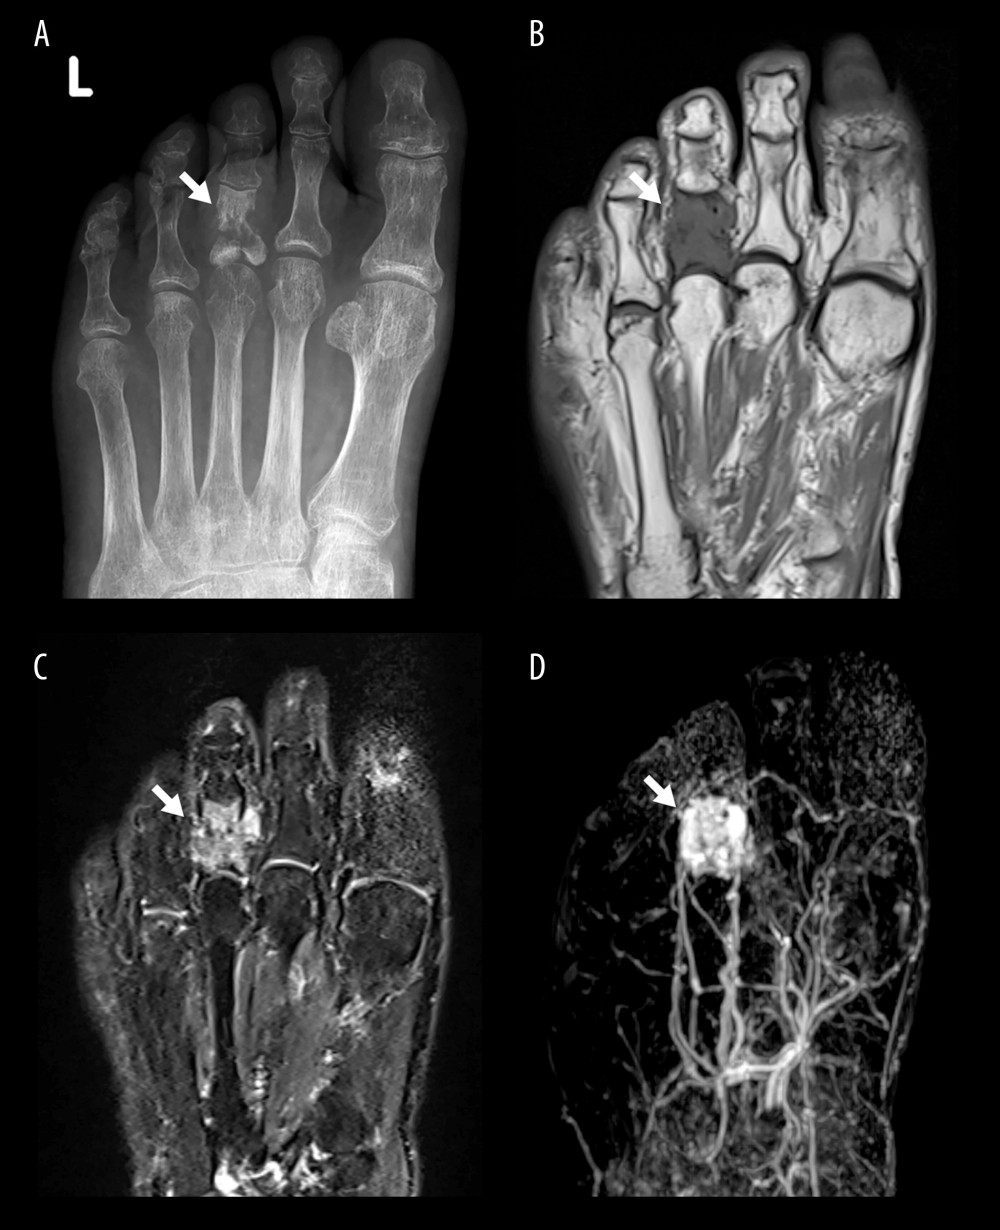 Imaging examinations identifying the tumor responsible for tumor-induced osteomalacia. Radiography reveals destructive changes in the third basal phalanx of the left foot. (A) The cortical bone in the distal third of the left basal phalanx exhibited pervasive expansible alterations and partial deterioration. (B, C) The inner part is replaced by an injury that exhibits a low signal intensity similar to that of the muscle tissue on T1-weighted imaging and a heterogeneous mixed high signal on fat-suppressed T2-weighted imaging. (D) The dynamic magnetic resonance imaging subtraction technique demonstrates robust early enhancement in the marginal areas, followed by gradual enhancement of the inner area.